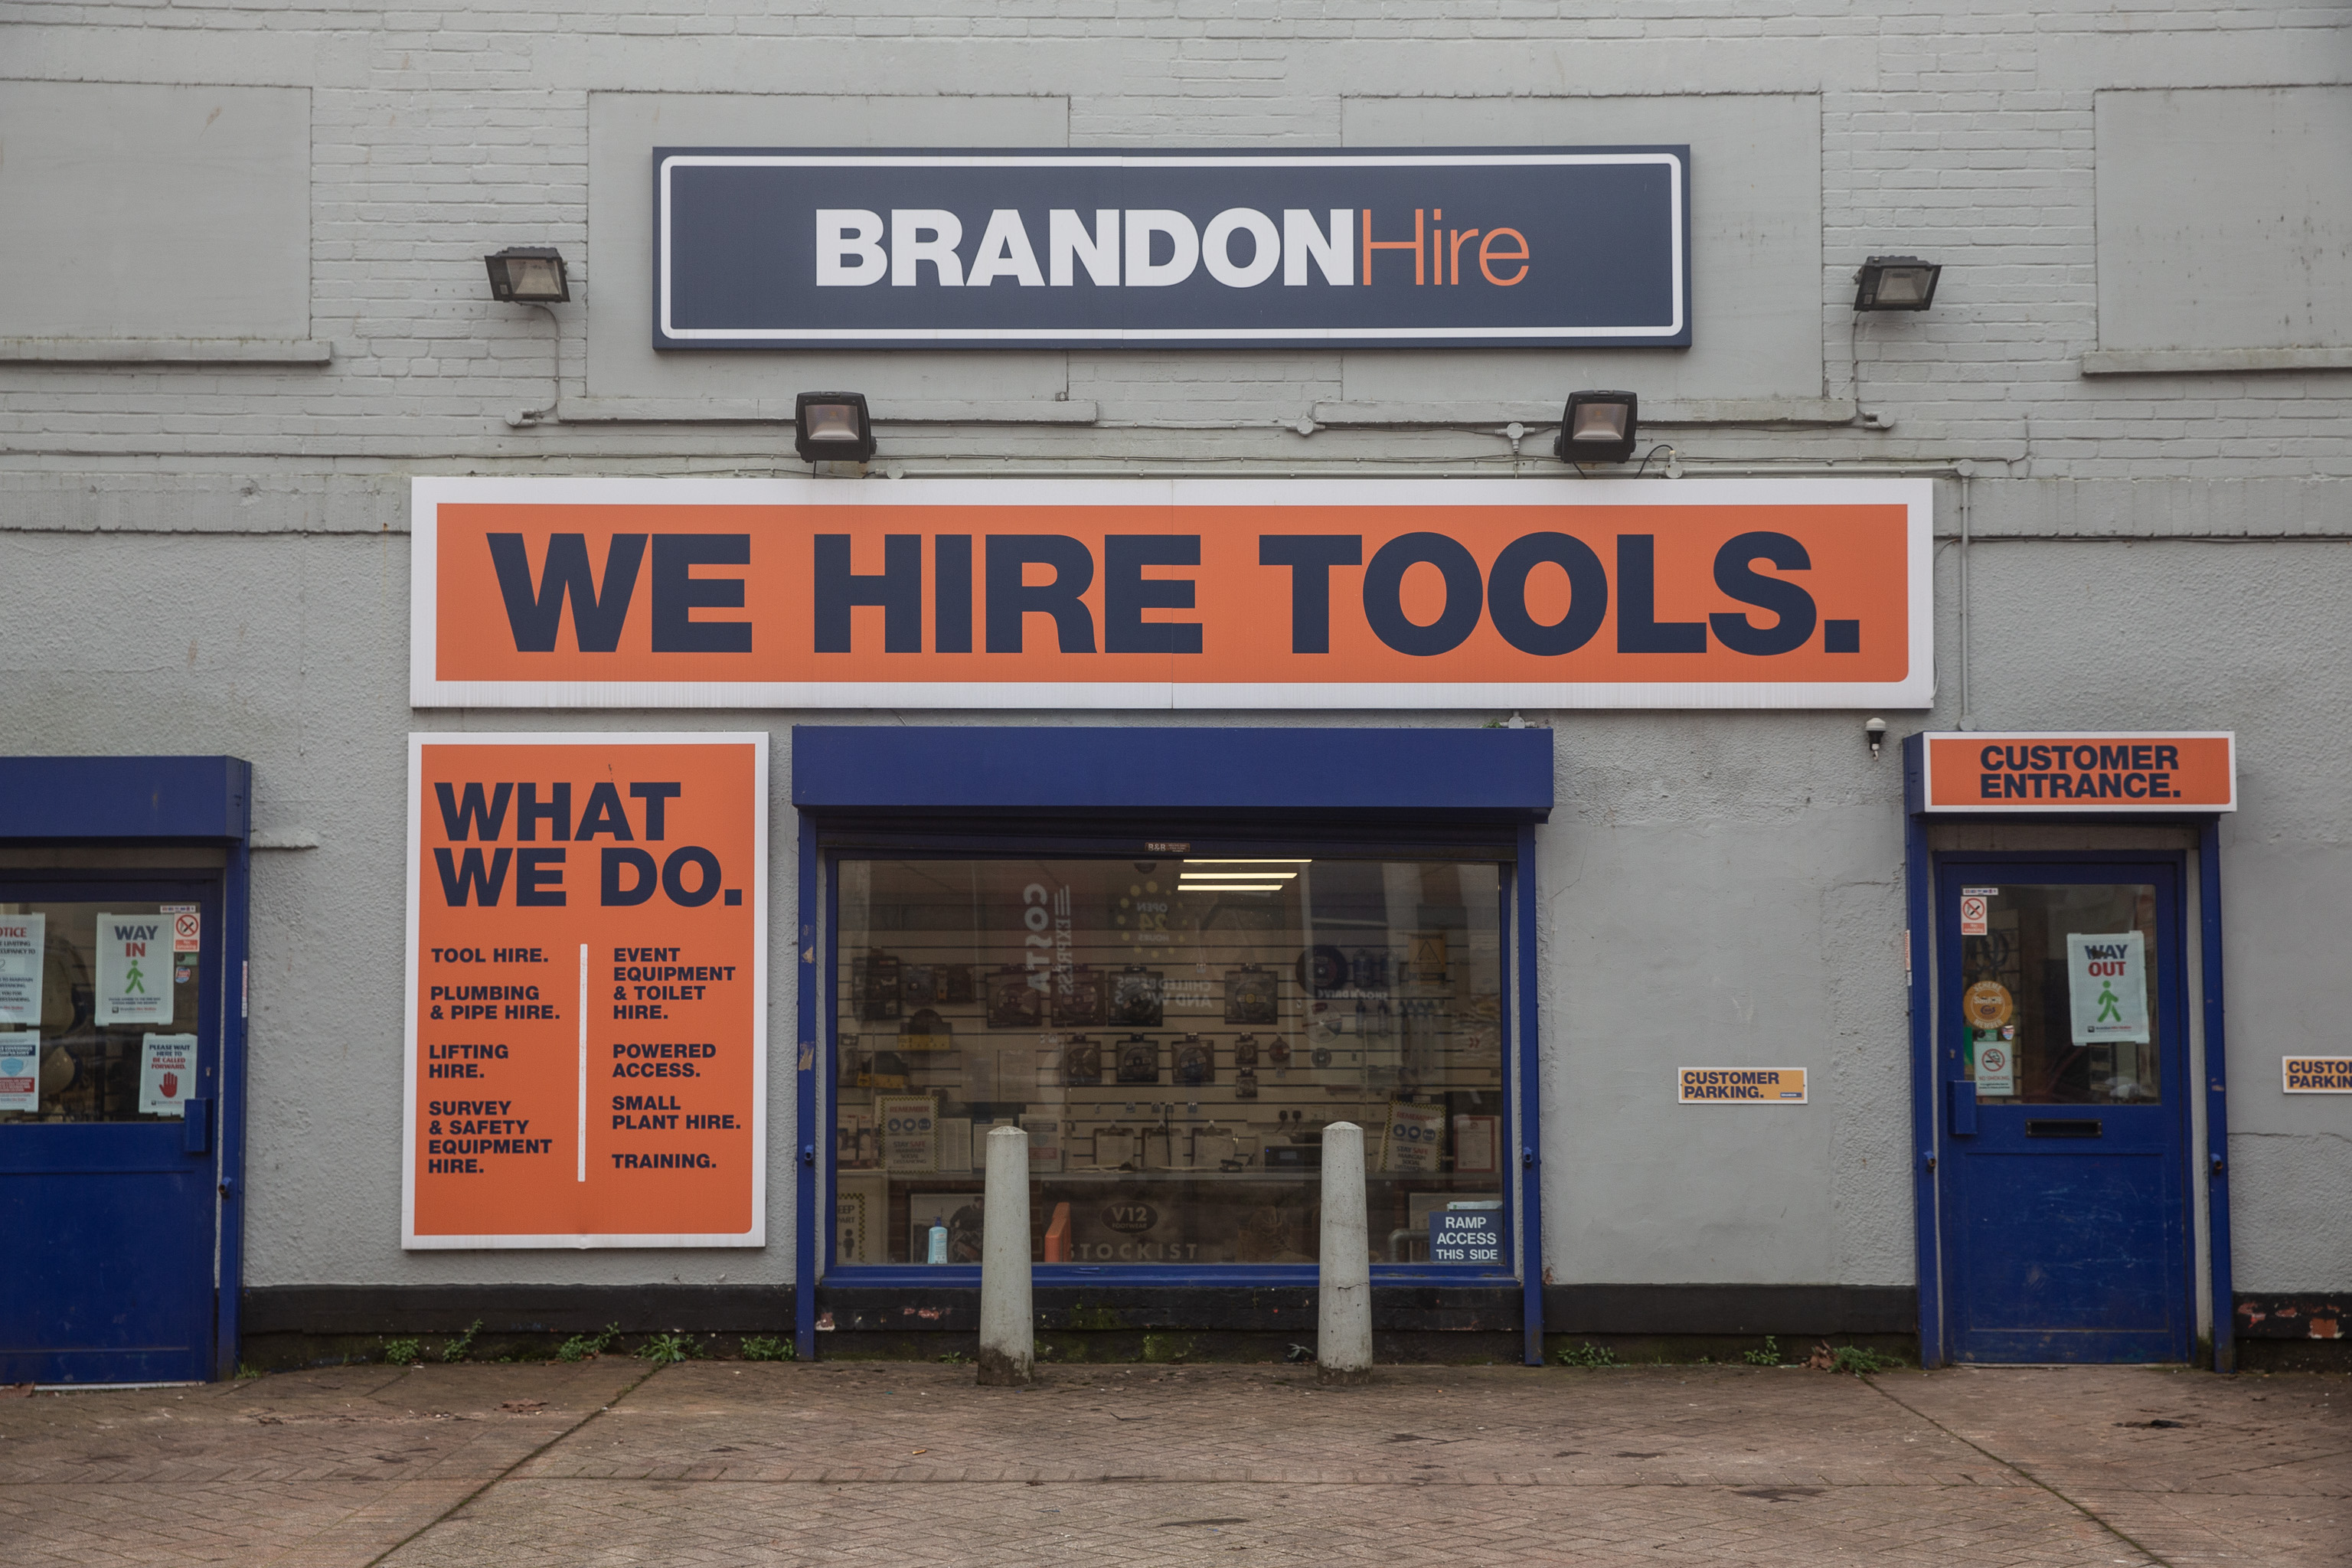 WE HIRE TOOLS
I can't imagine that their HR team was as pleased with the slogan as their PR team.
